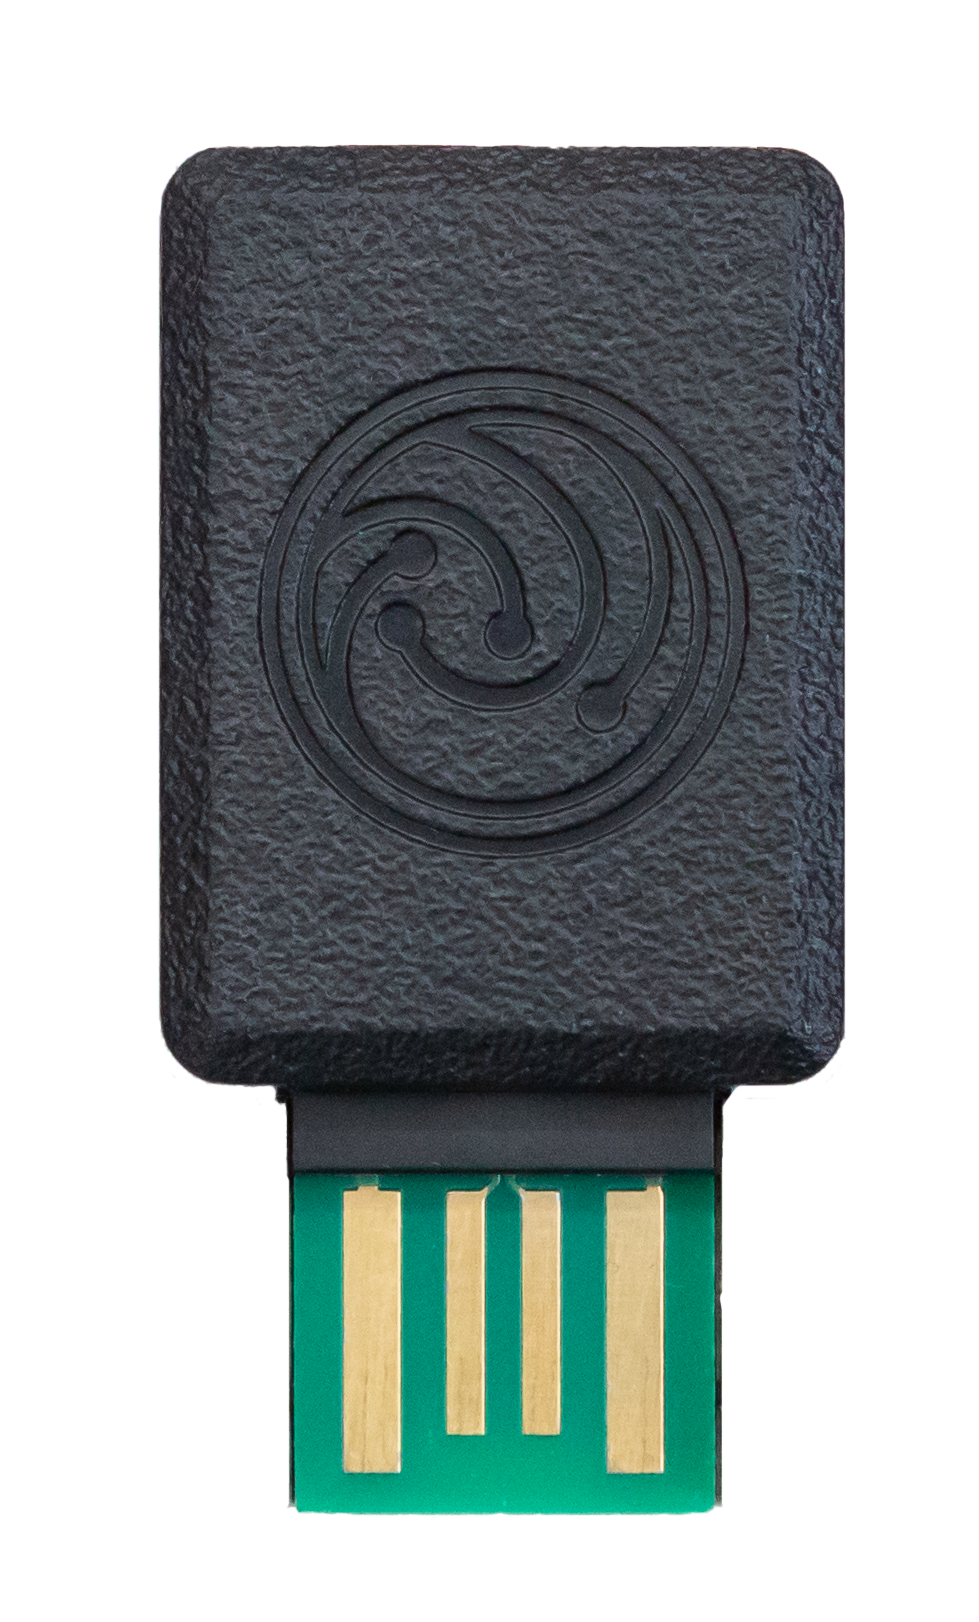 Image of the NPE GEM3USB with standard black plastic cover